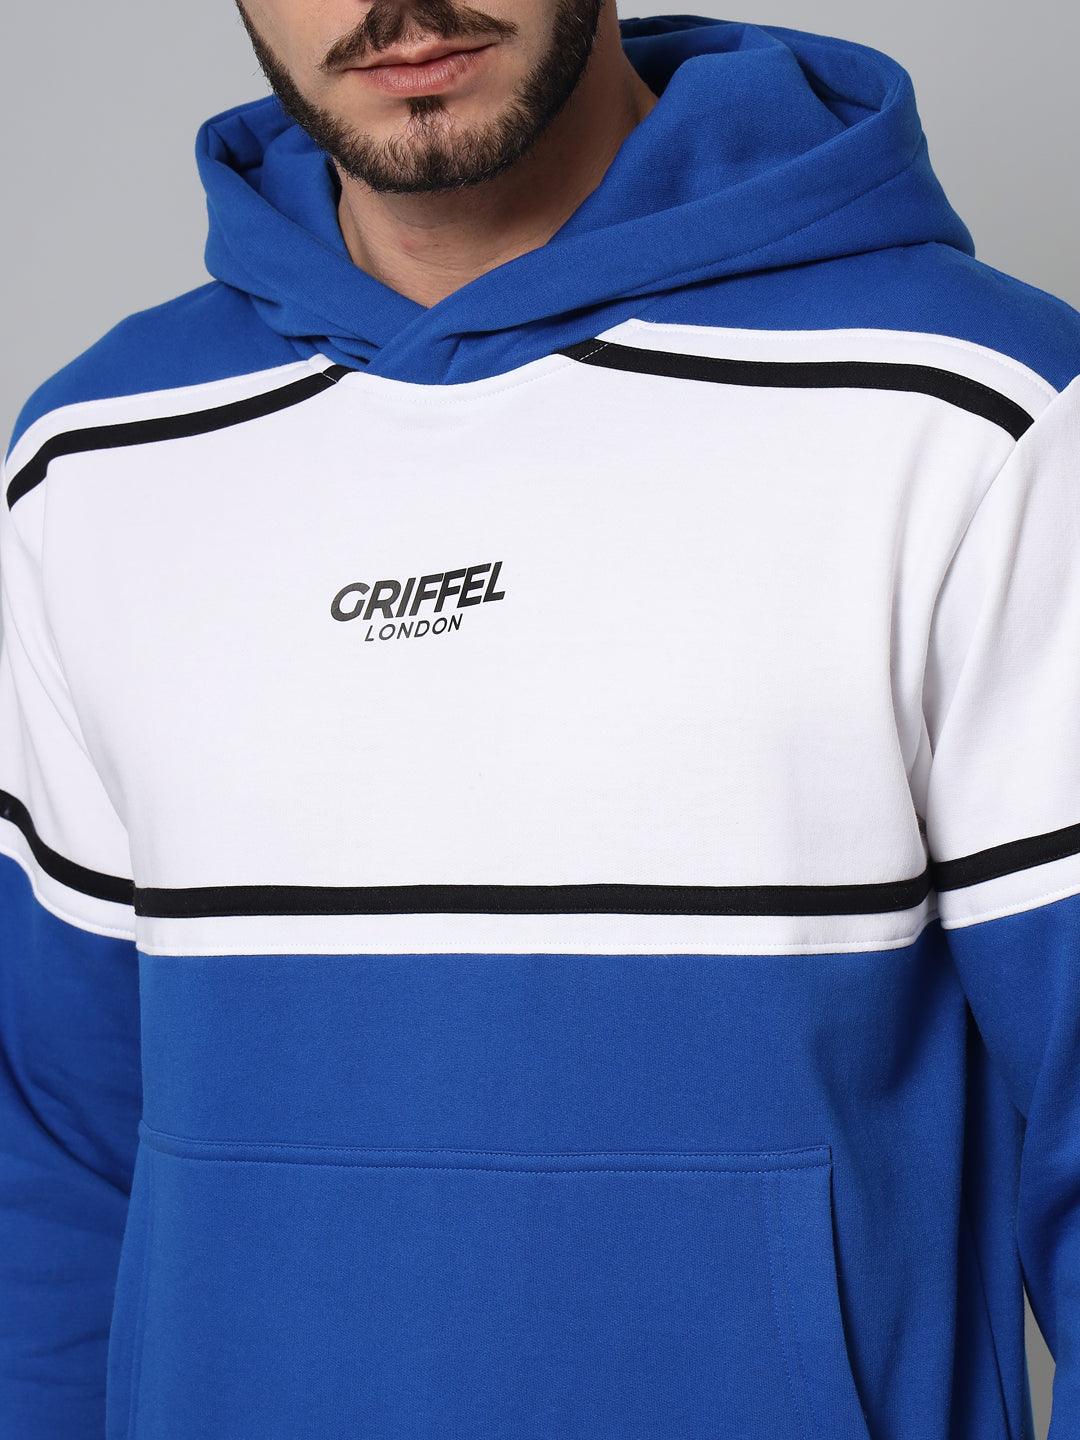 Griffel Men's Cotton Fleece Colorblocked Royal Sweatshirt with Long Sleeve and Front Logo Print - griffel